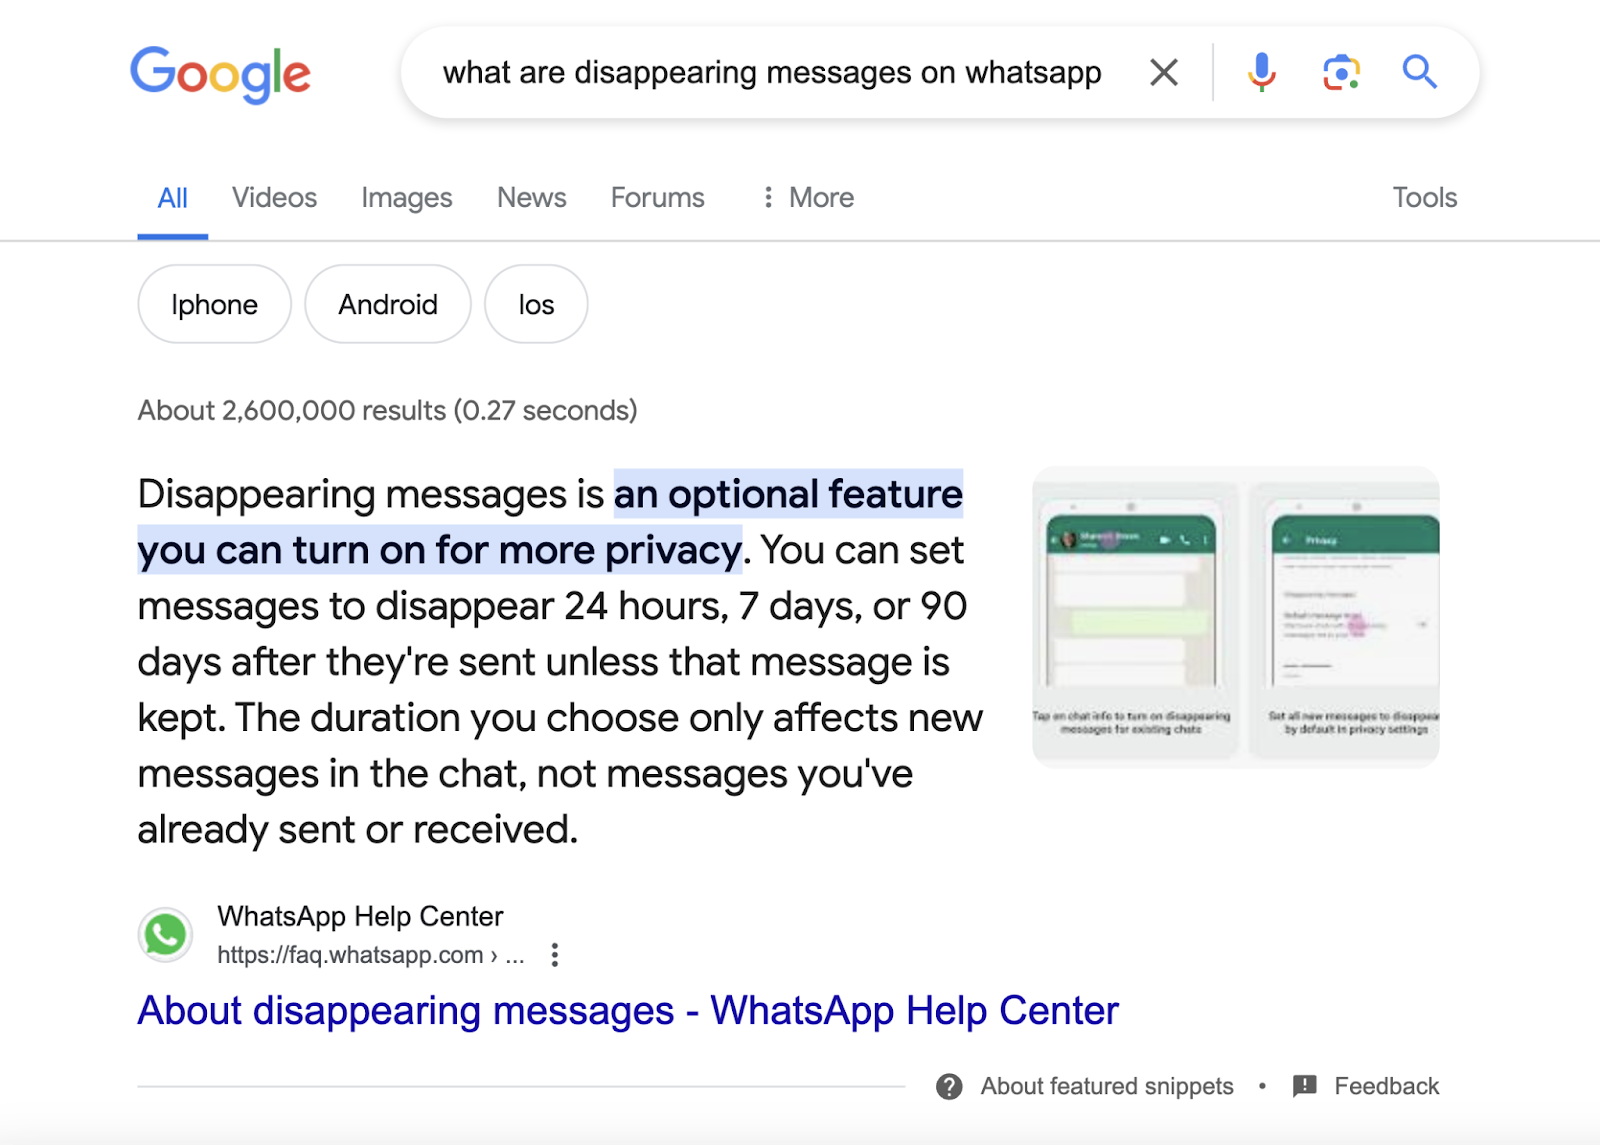 google hunt  for "what are disappearing messages connected  whatsapp" shows featured snippet for whatsapp assistance   center